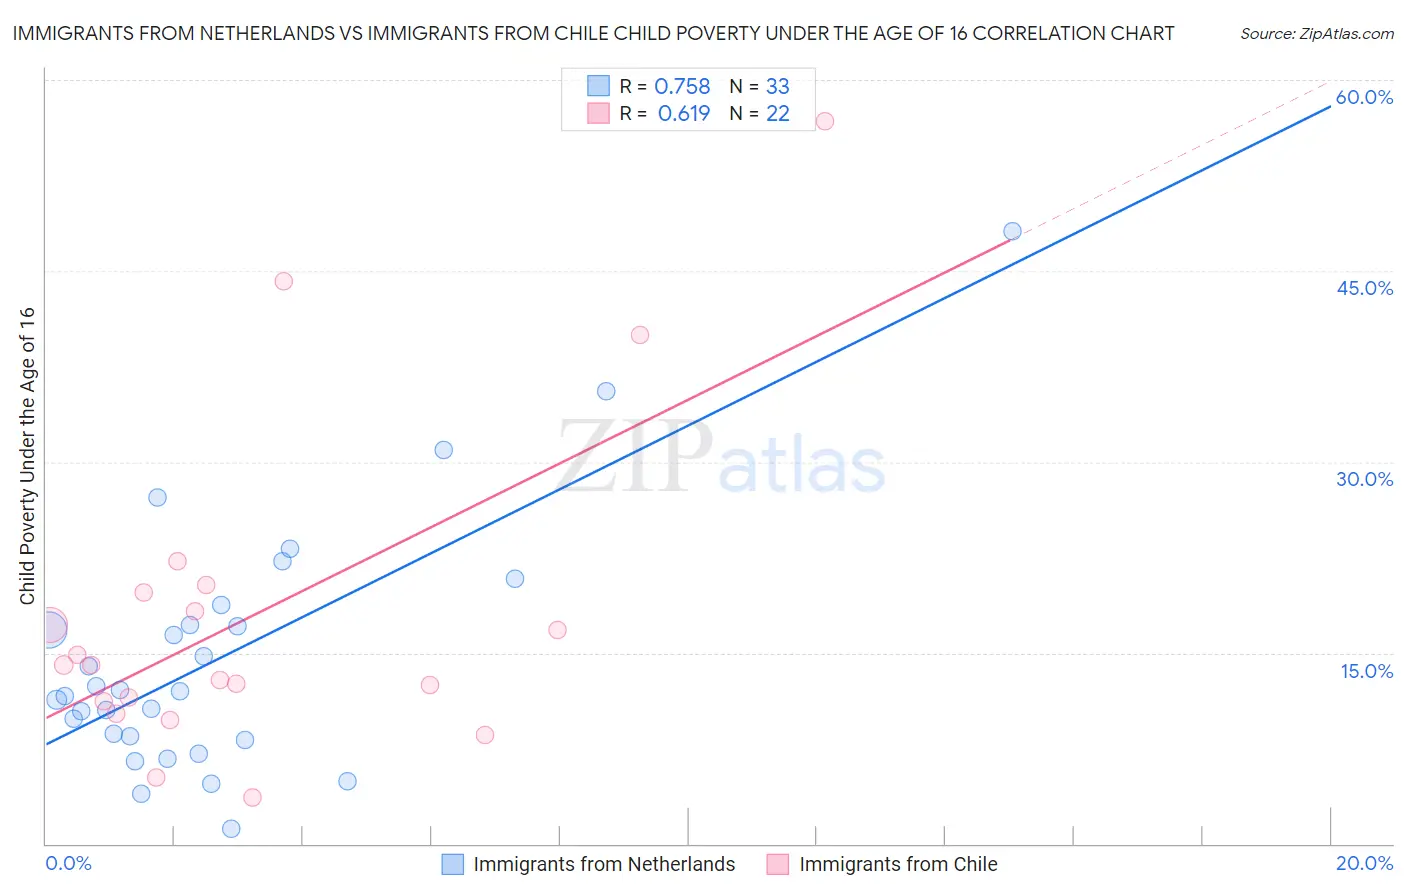 Immigrants from Netherlands vs Immigrants from Chile Child Poverty Under the Age of 16